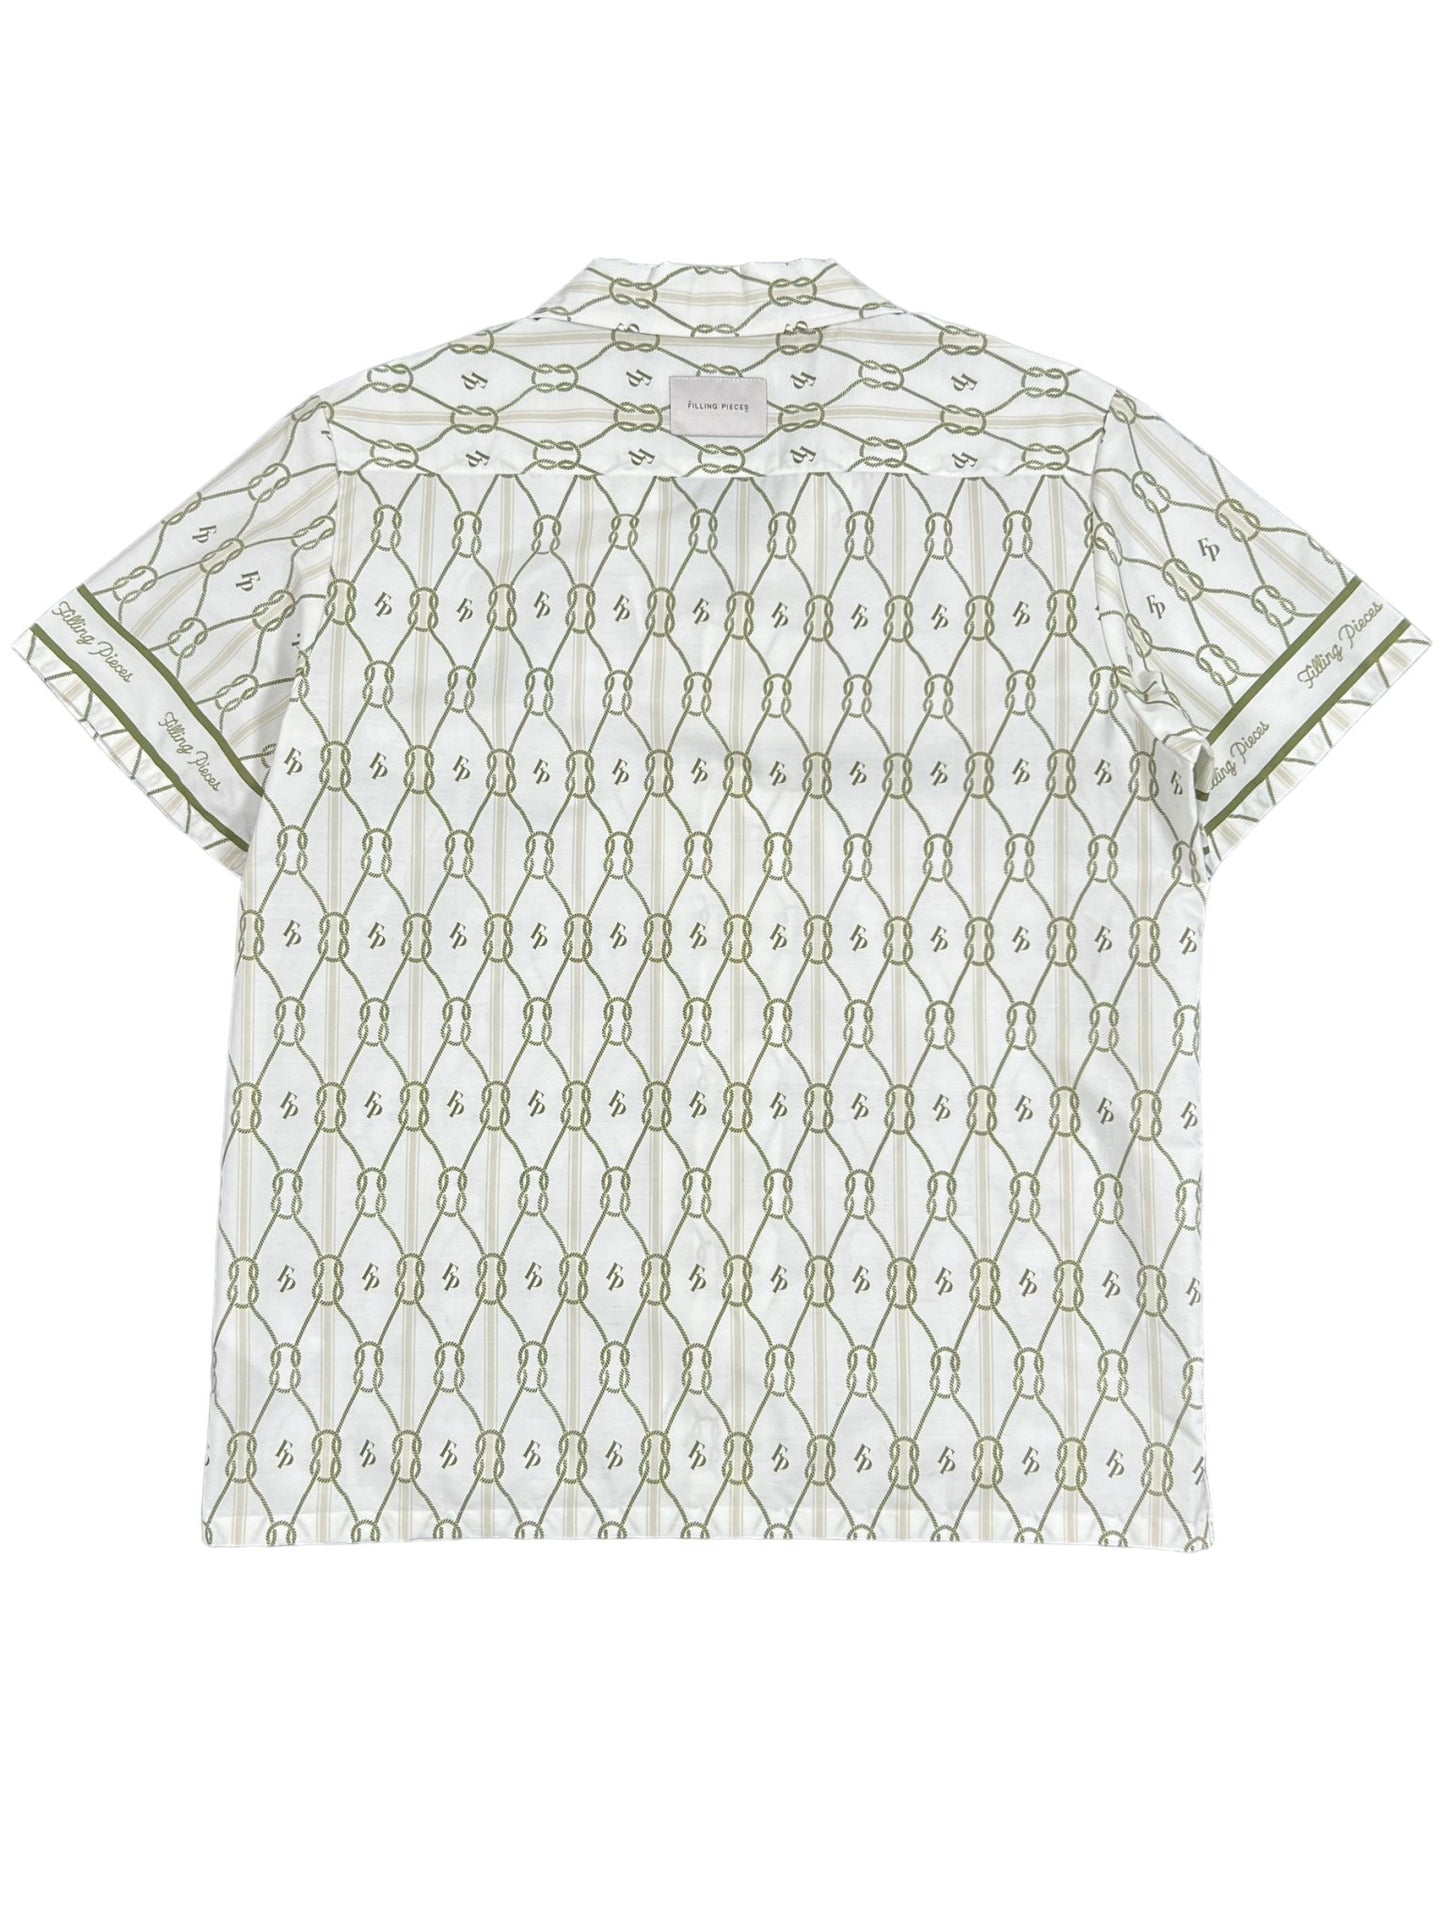 Green and white patterned FILLING PIECES RESORT MONOGRAM SHIRT displayed against a white background.